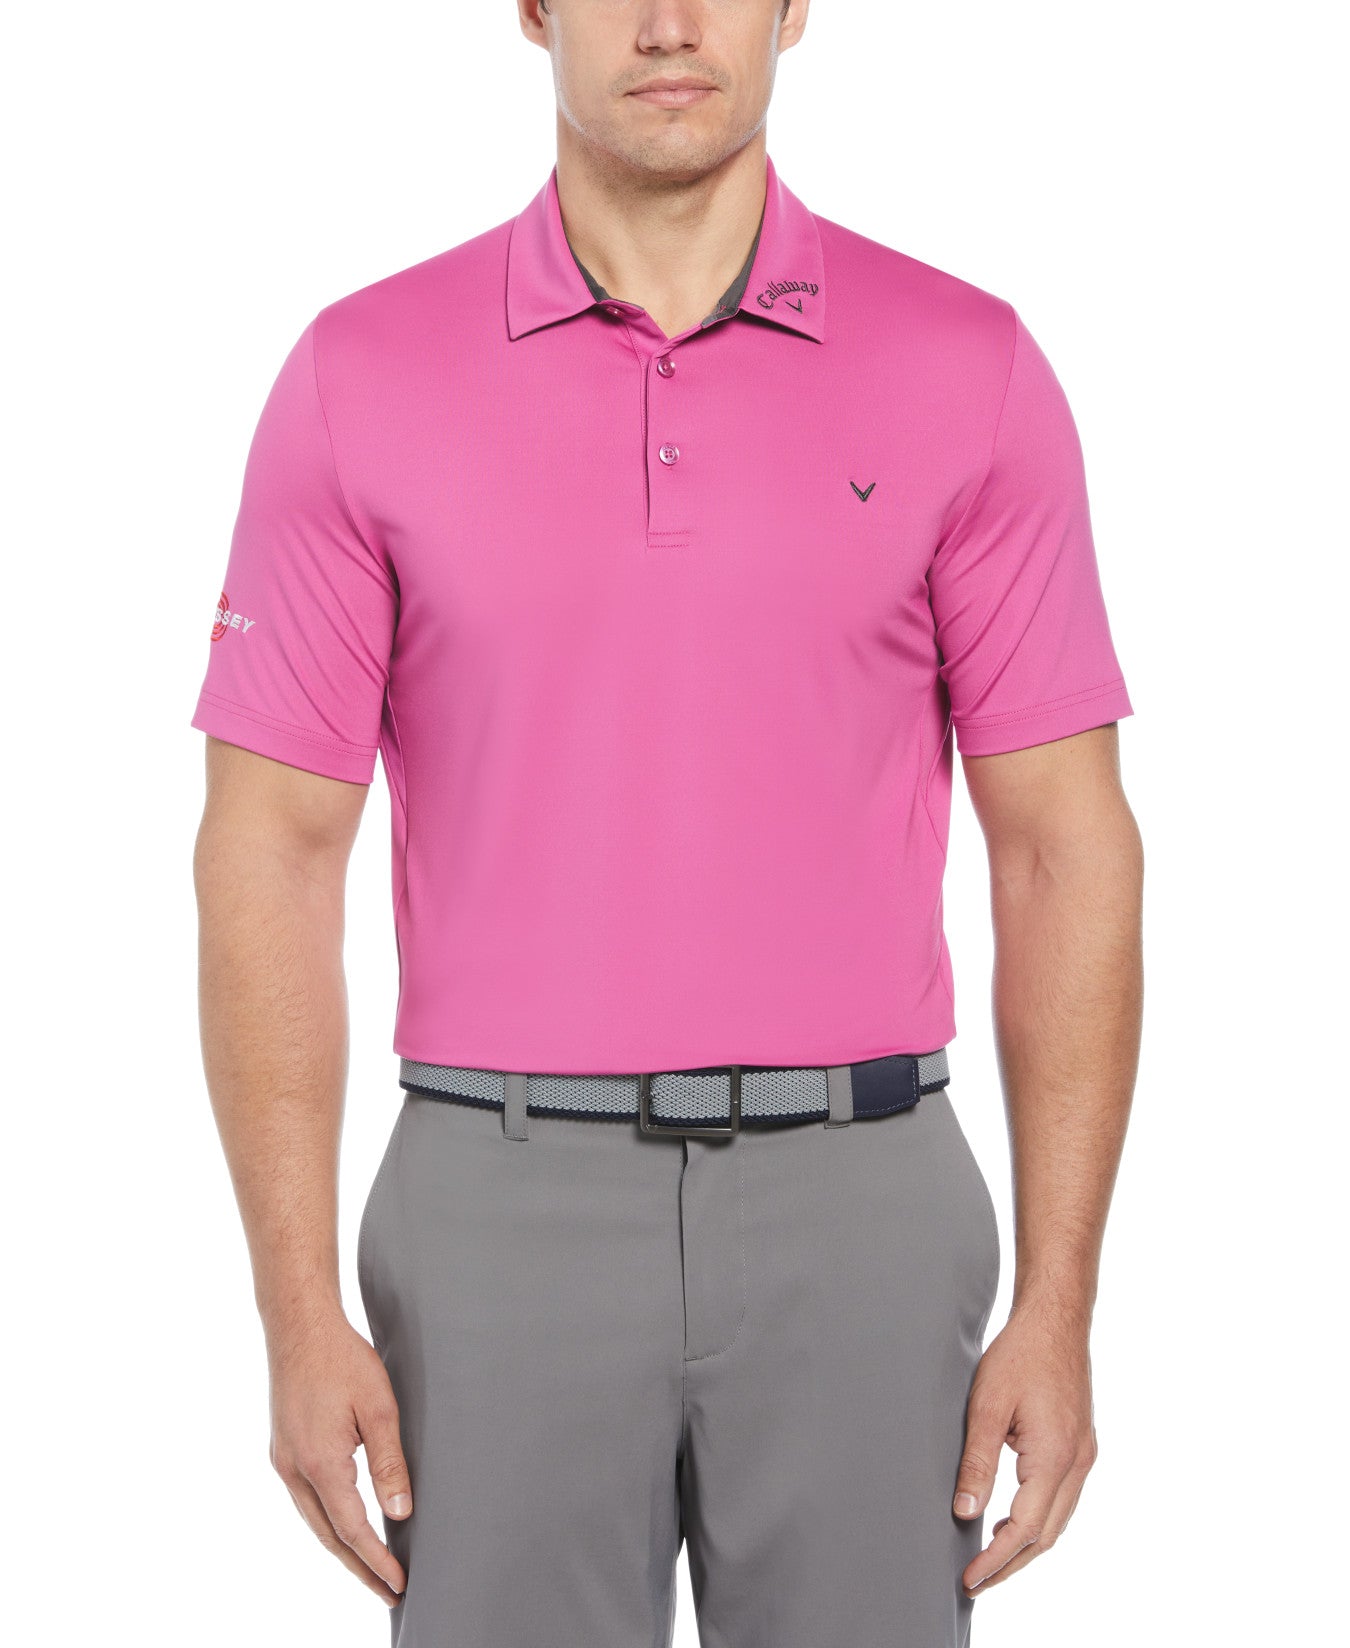 View Short Sleeve Odyssey Block Polo Shirt In Purple Orchid information